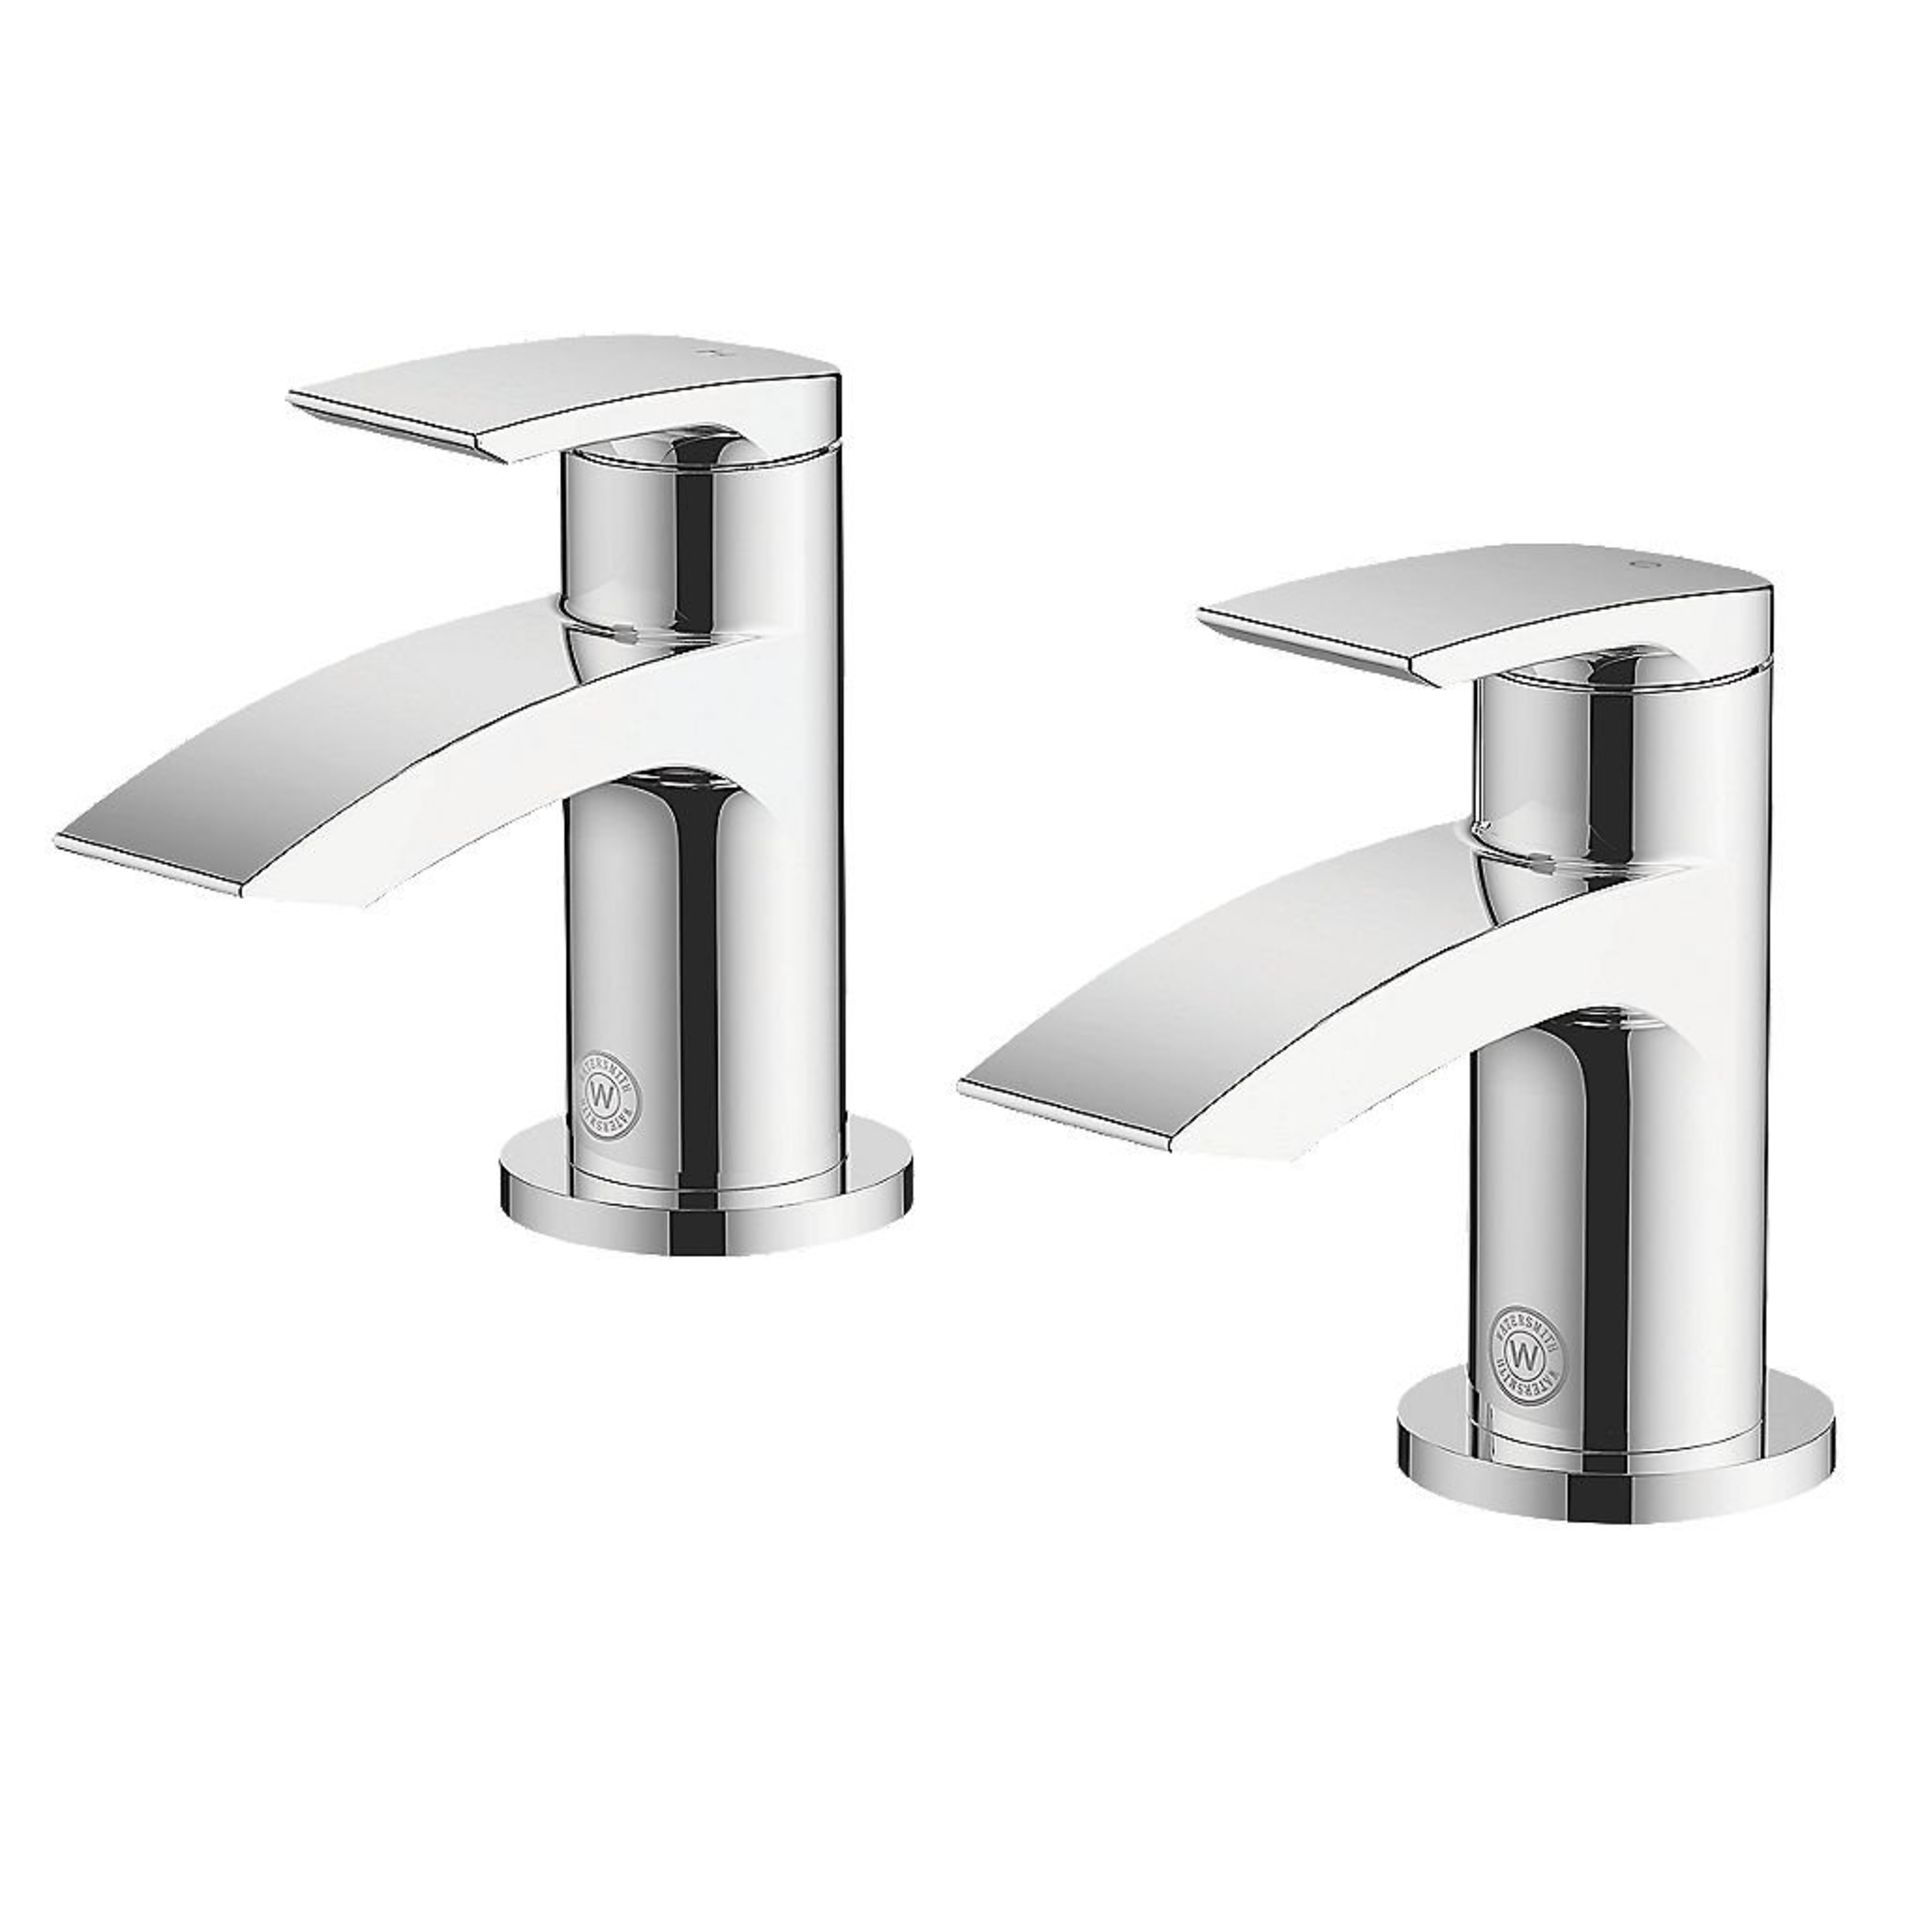 (XX48) Heritage Wye Basin Taps Pair. 1/4 Turn Operation Suitable for High & Low Pressure Syste... - Image 2 of 2